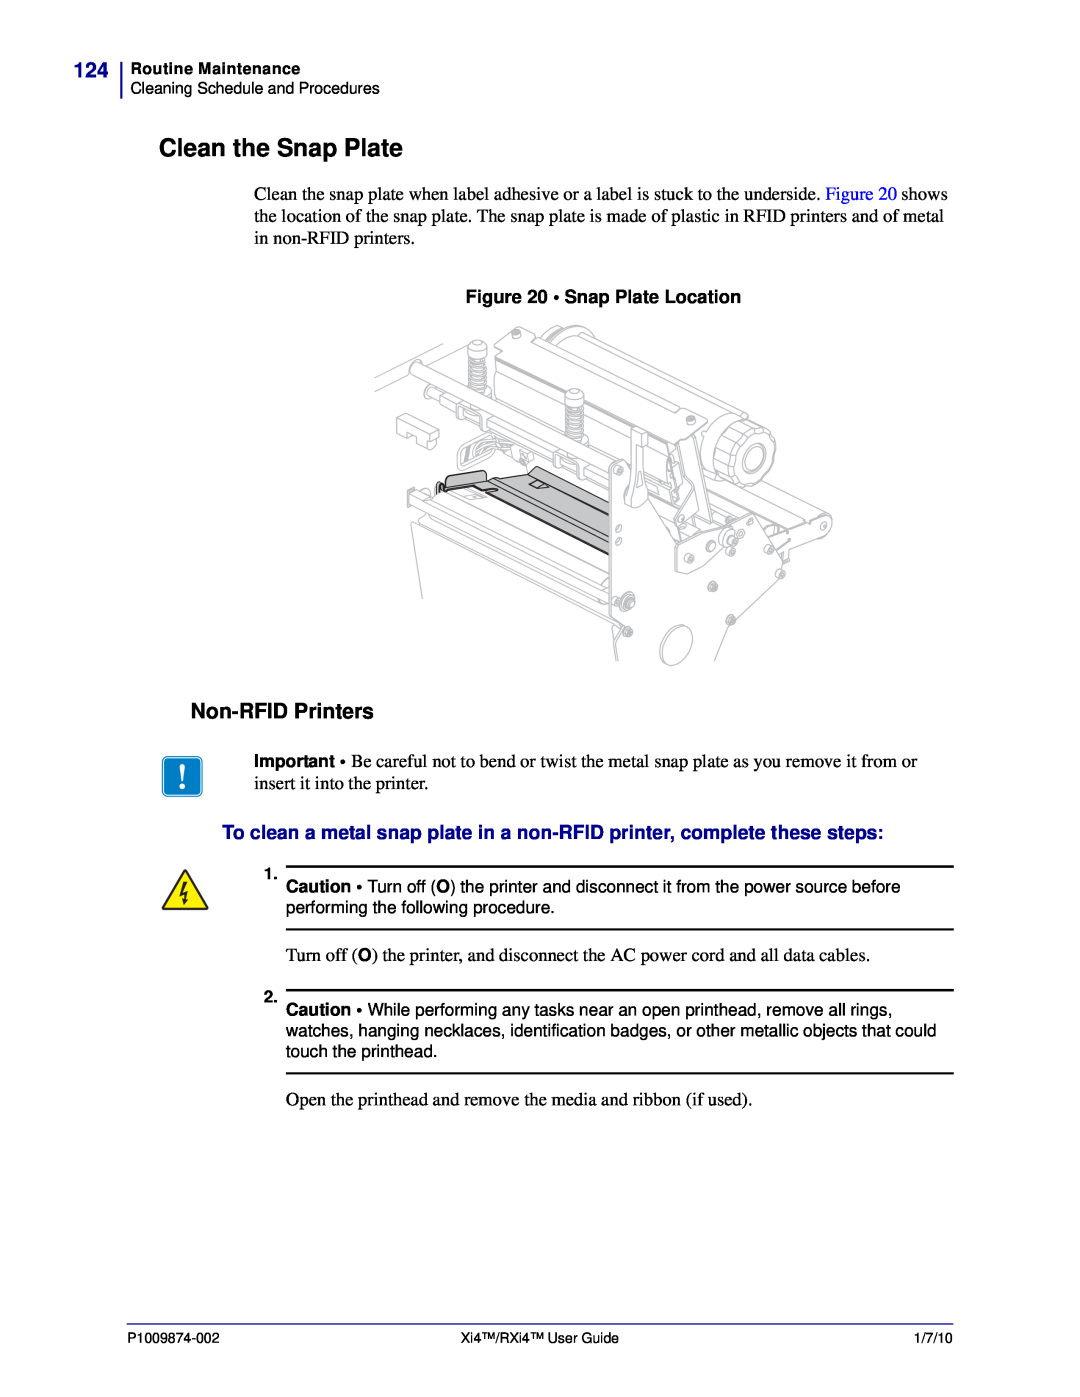 Zebra Technologies 11680100001, 14080100200, RXI4TM manual Clean the Snap Plate, Non-RFID Printers, Snap Plate Location 